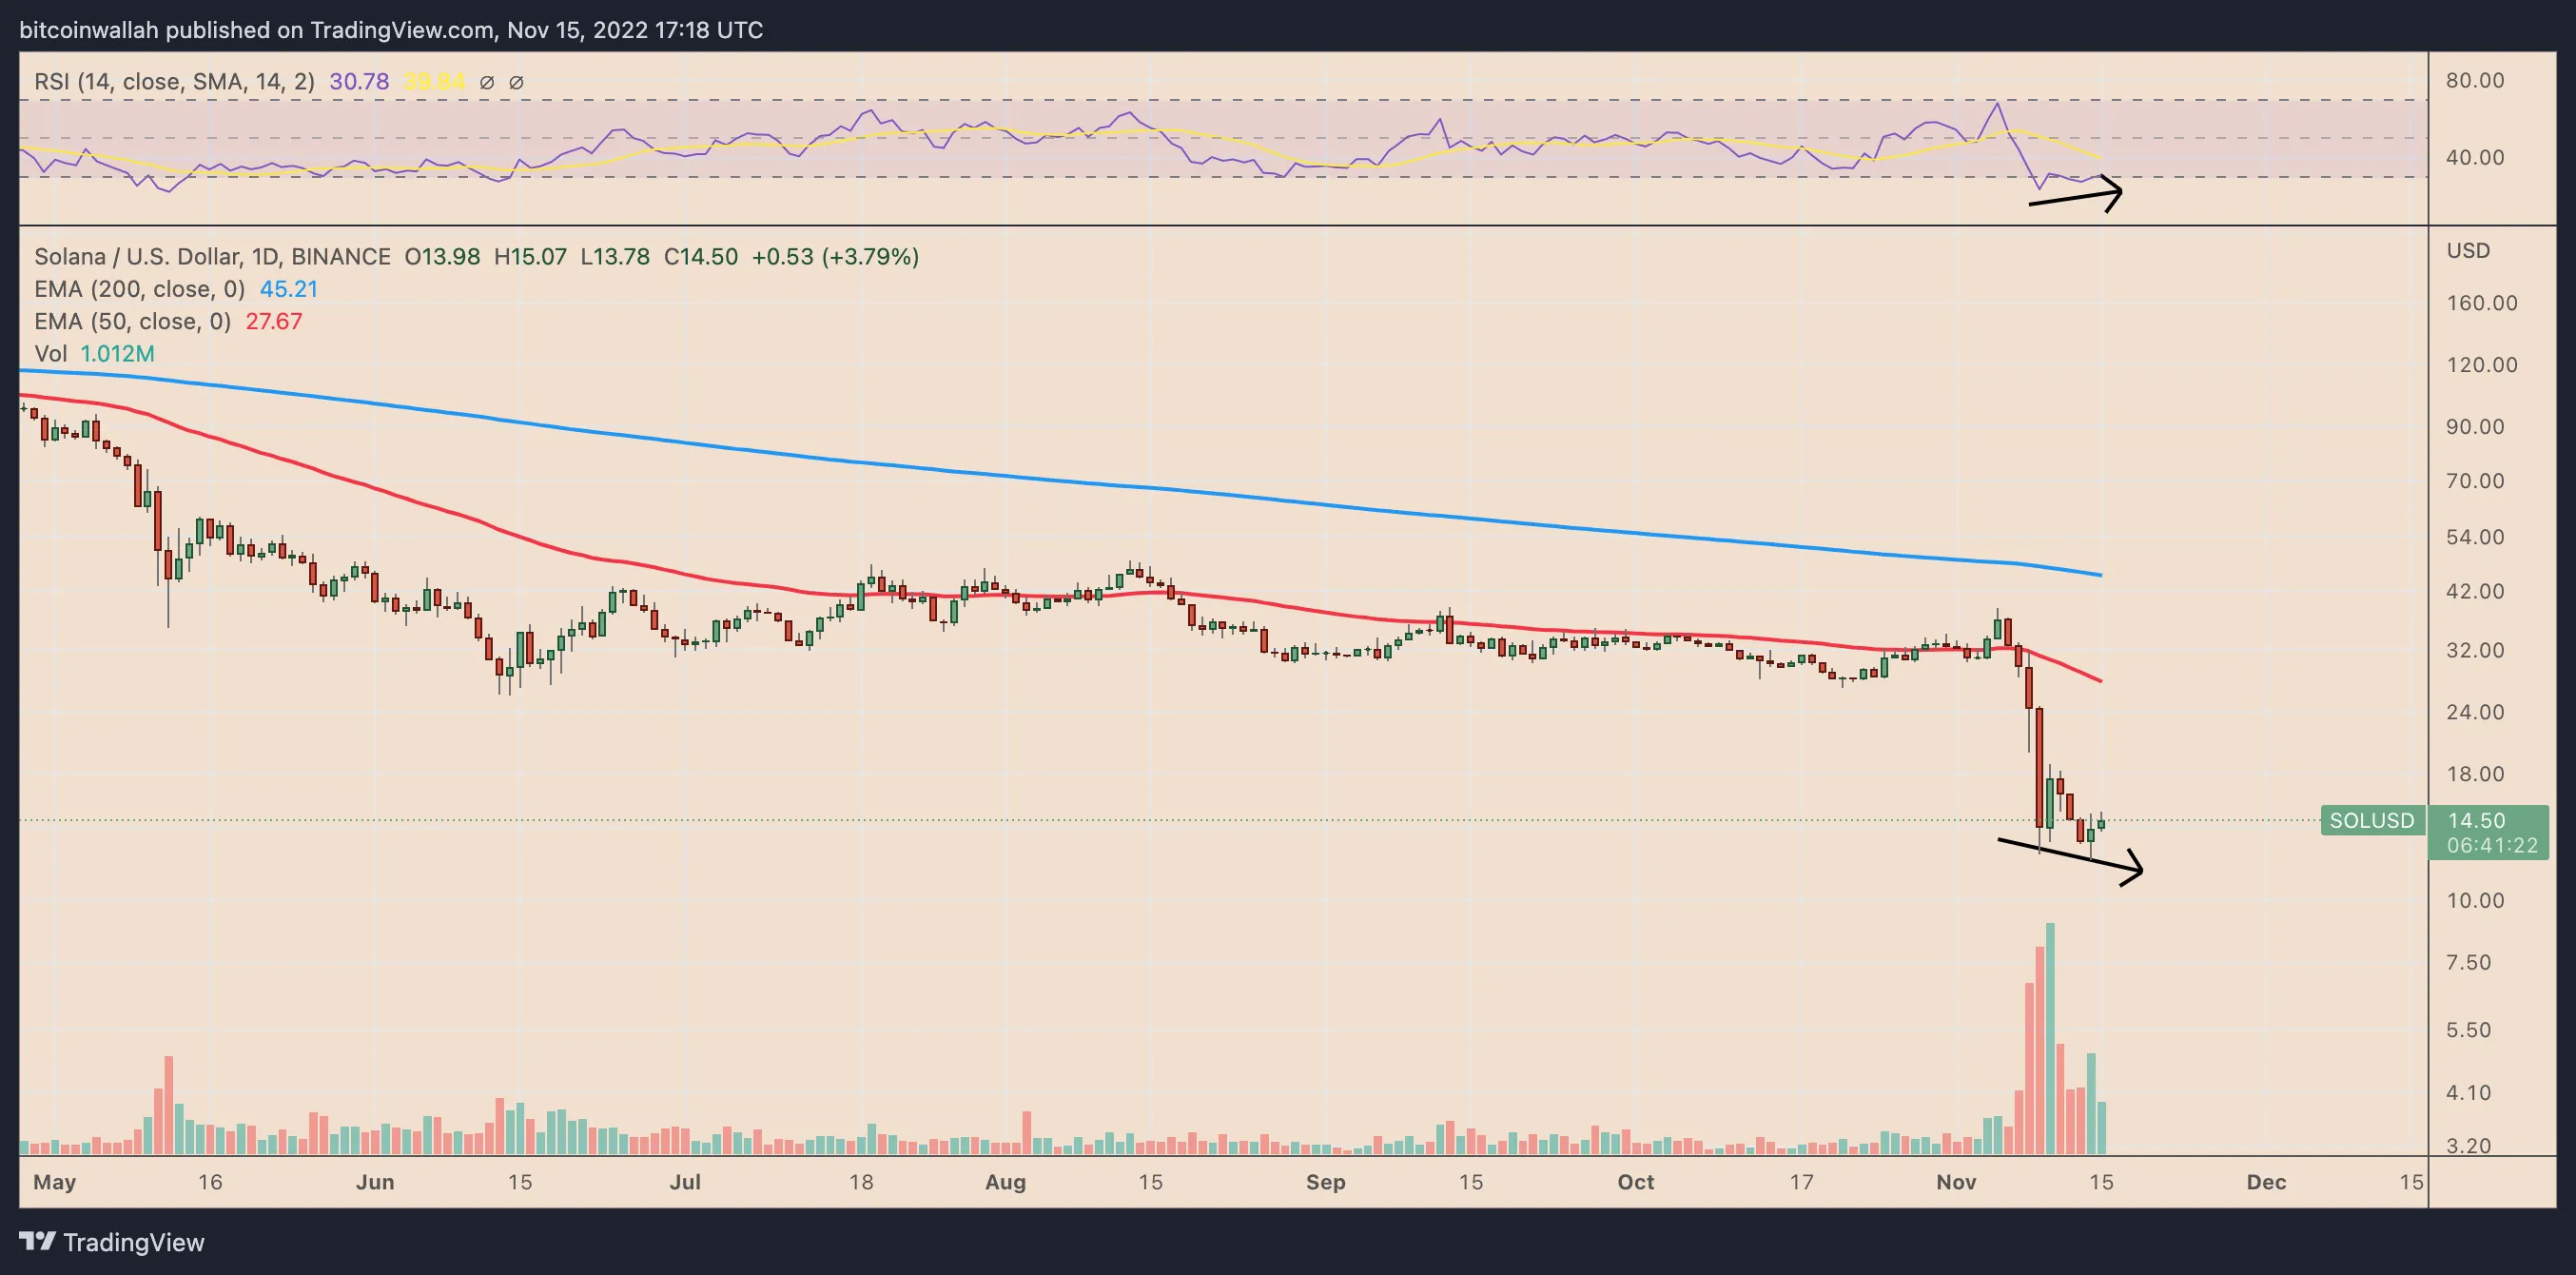 SOL/USD daily price chart featuring bullish divergence. Source: TradingView